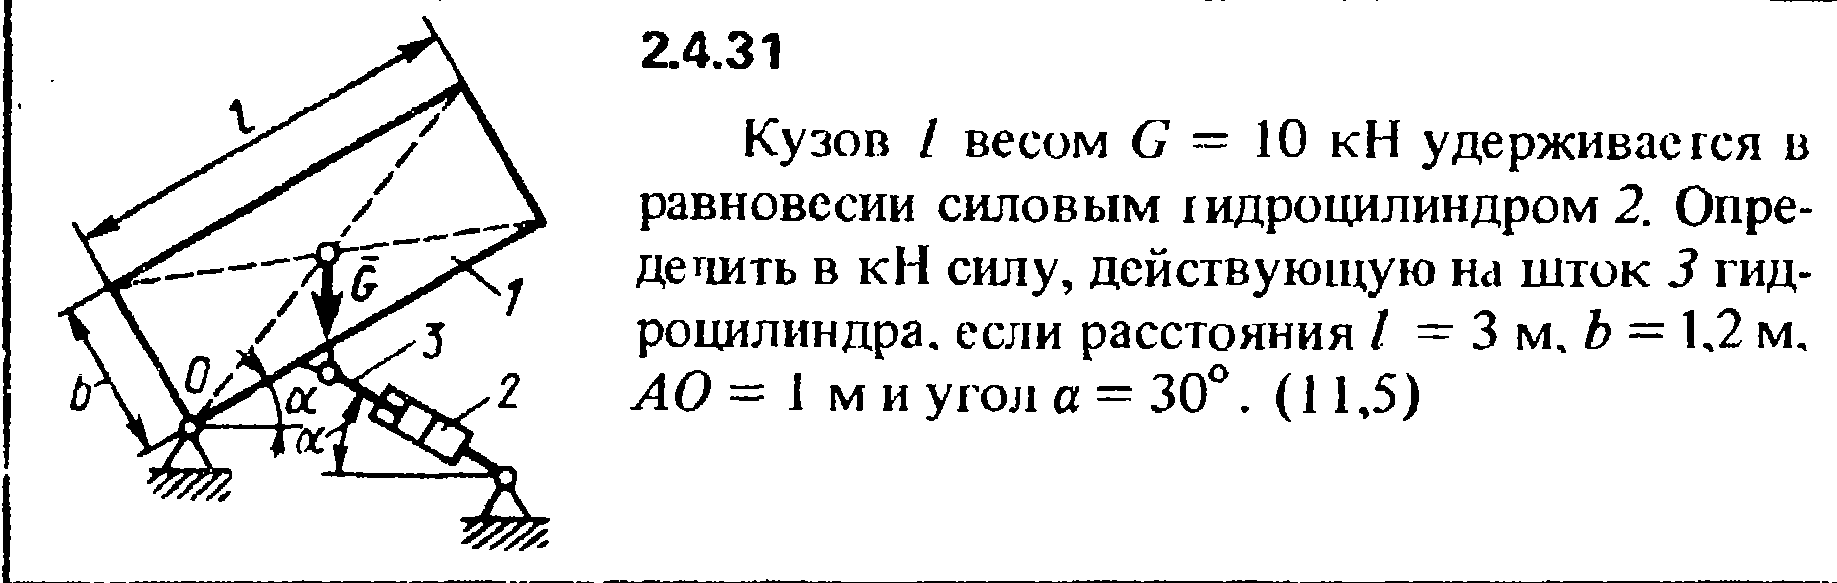 Solution of the problem of the collection of Kep 2.4.31